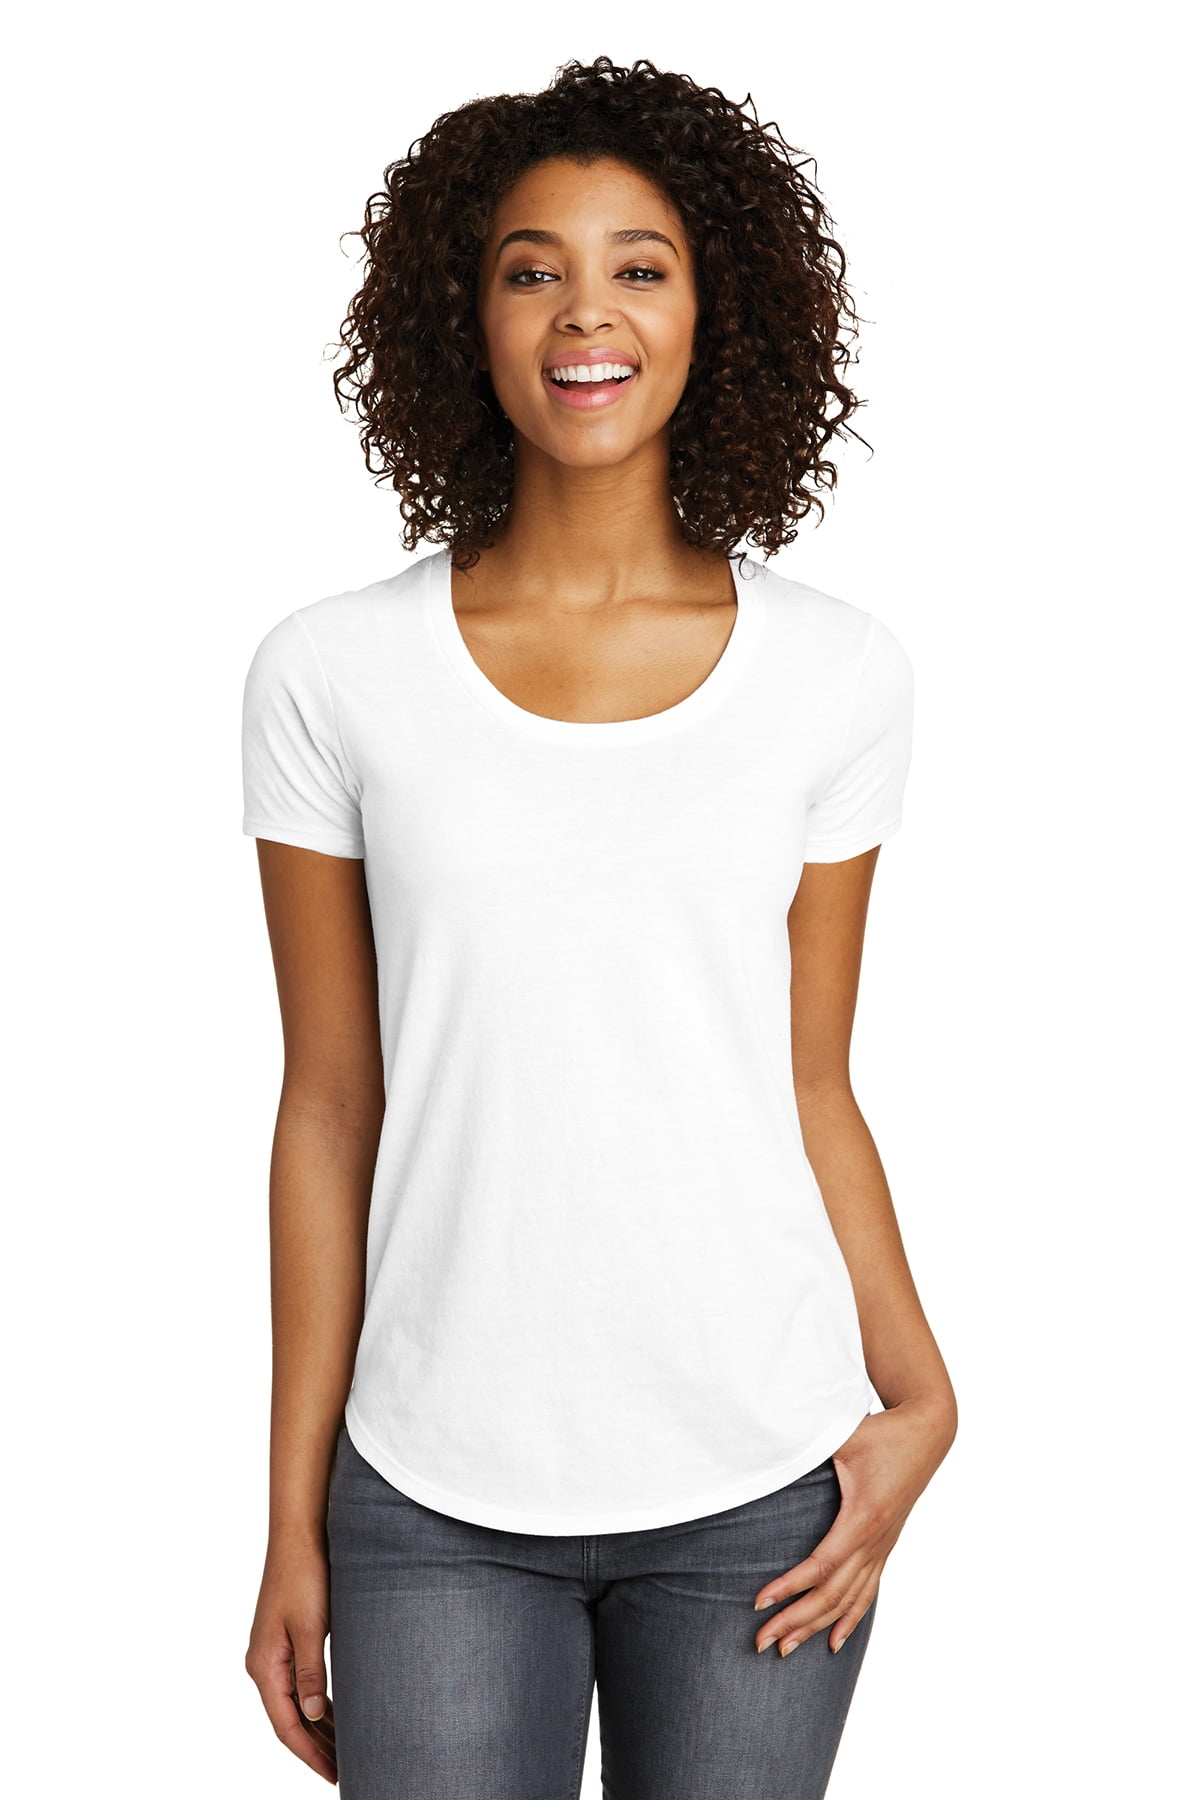 JustBlanks Women’s Short Sleeve Fitted Very Important Tee 4.3-ounce, 100%  Cotton Form Fitting Scoop Neck T-Shirt for women - White - X-Small